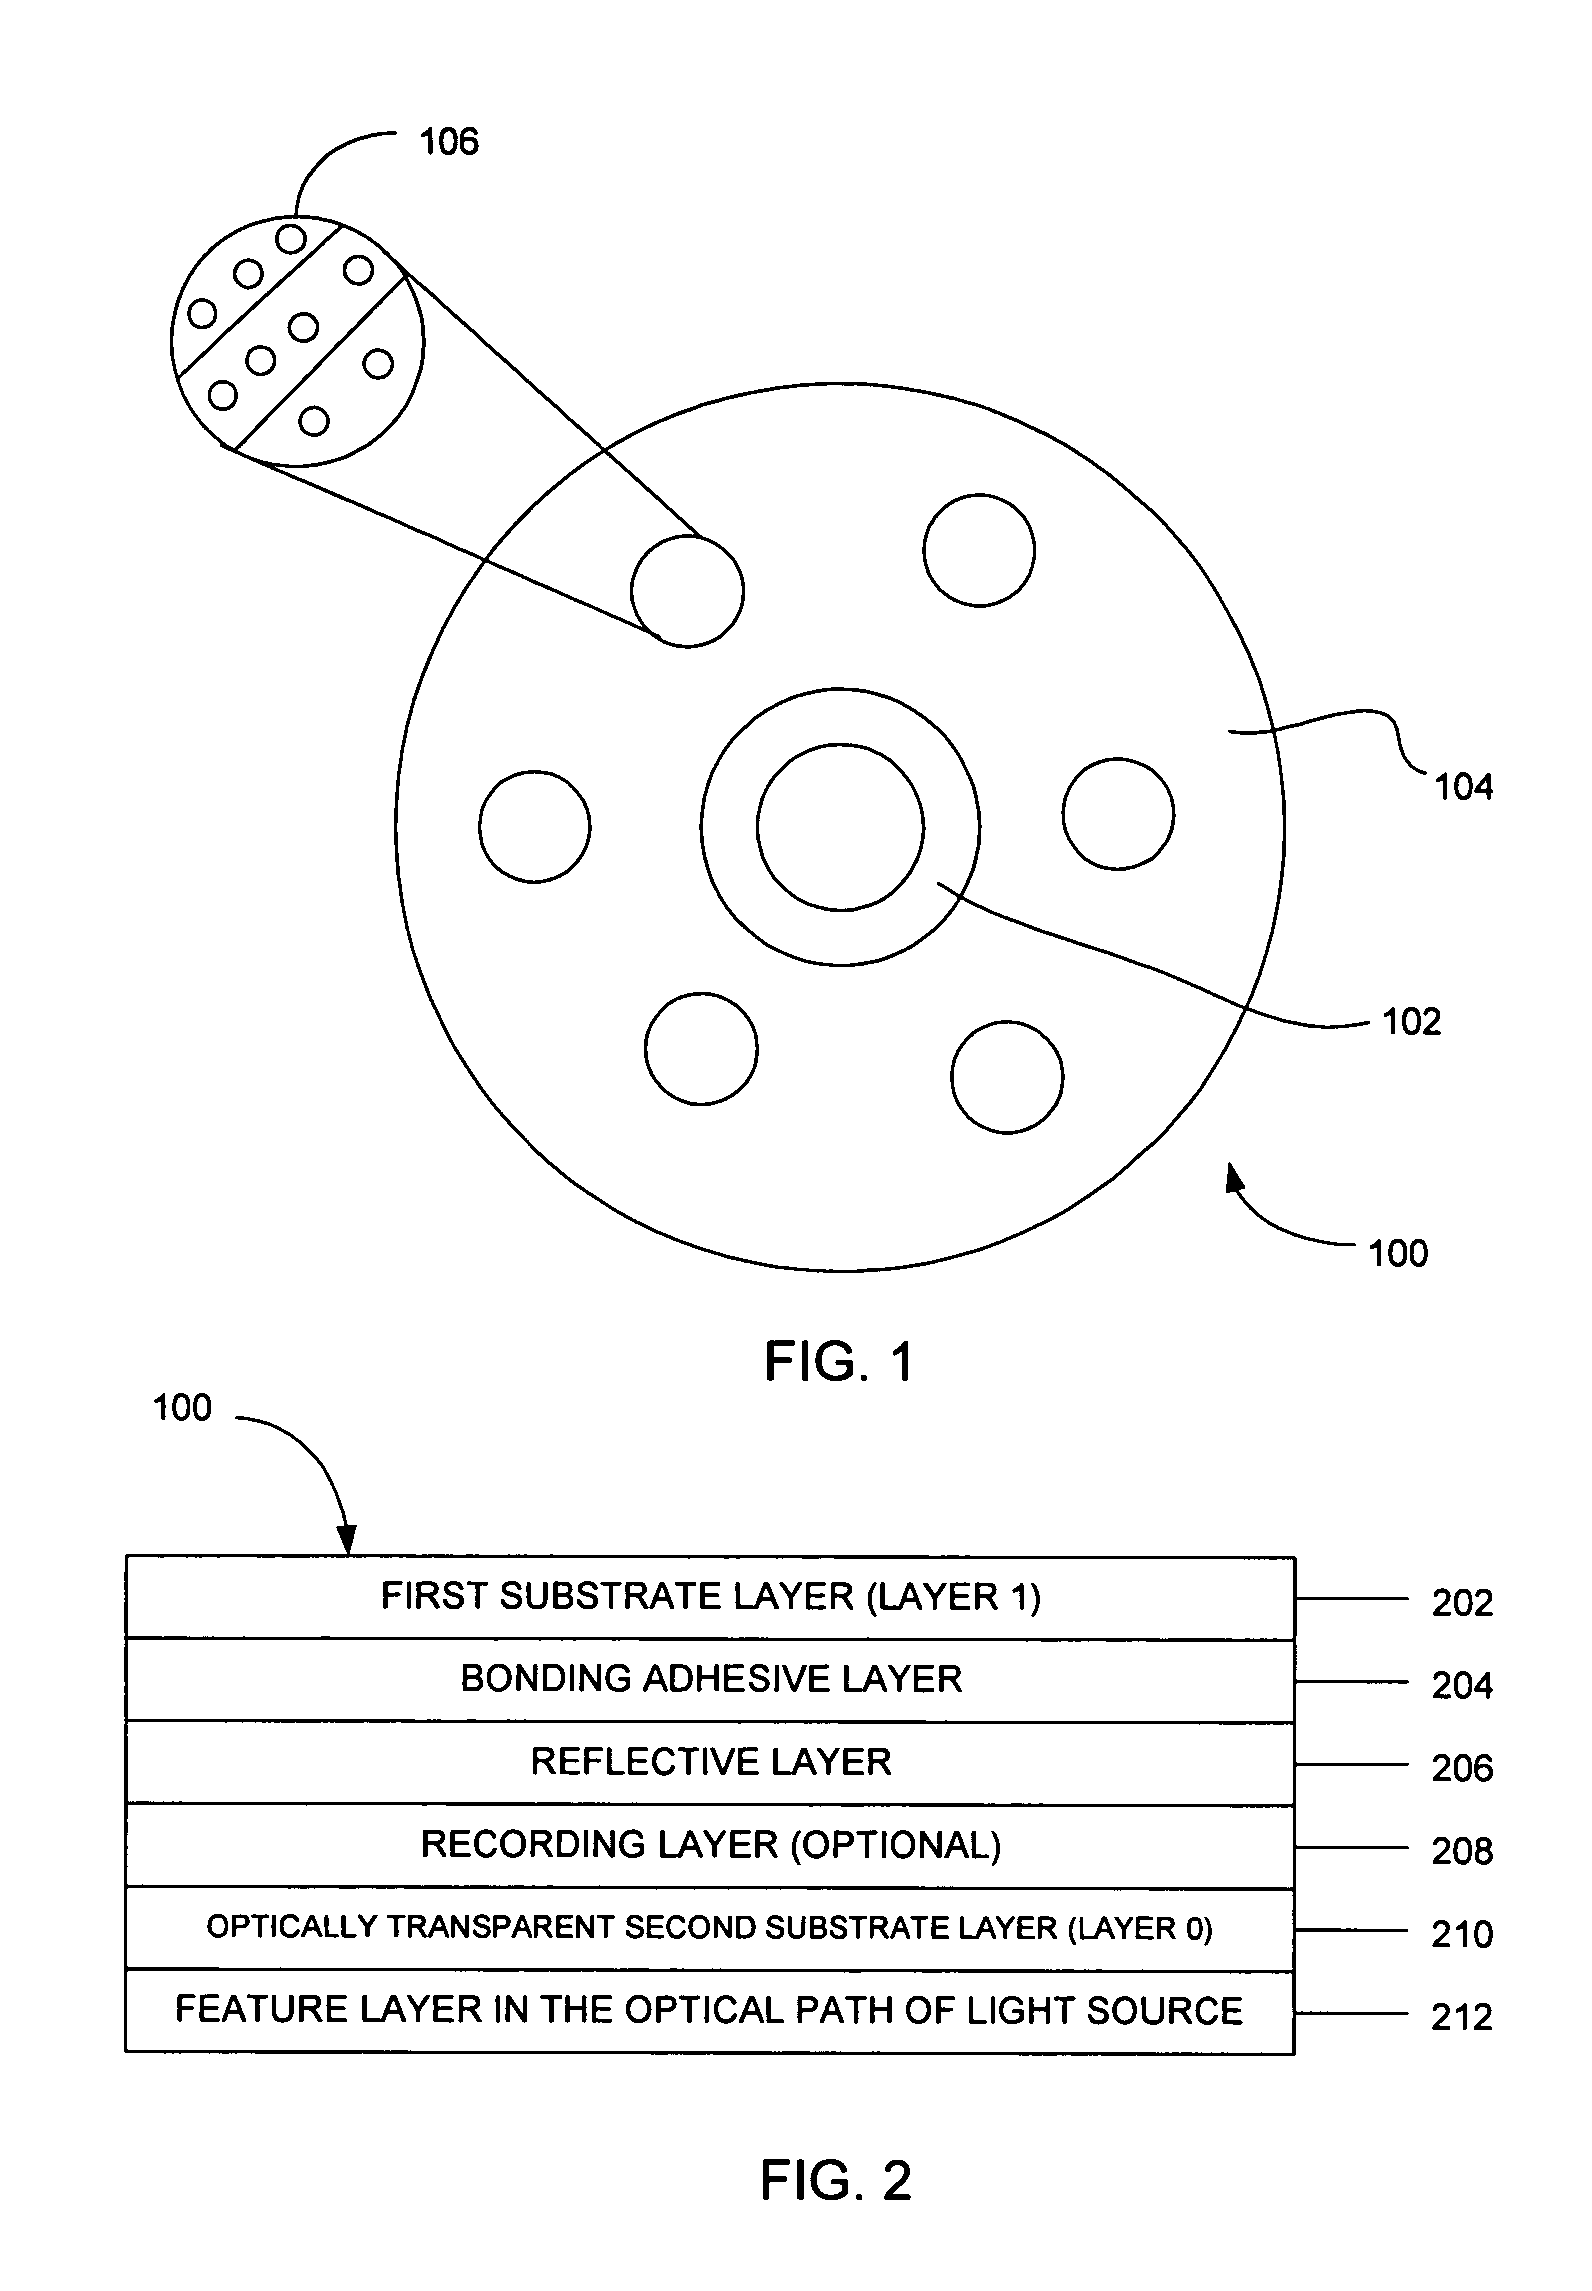 Authenticable optical disc, system for authenticating an optical disc and method thereof